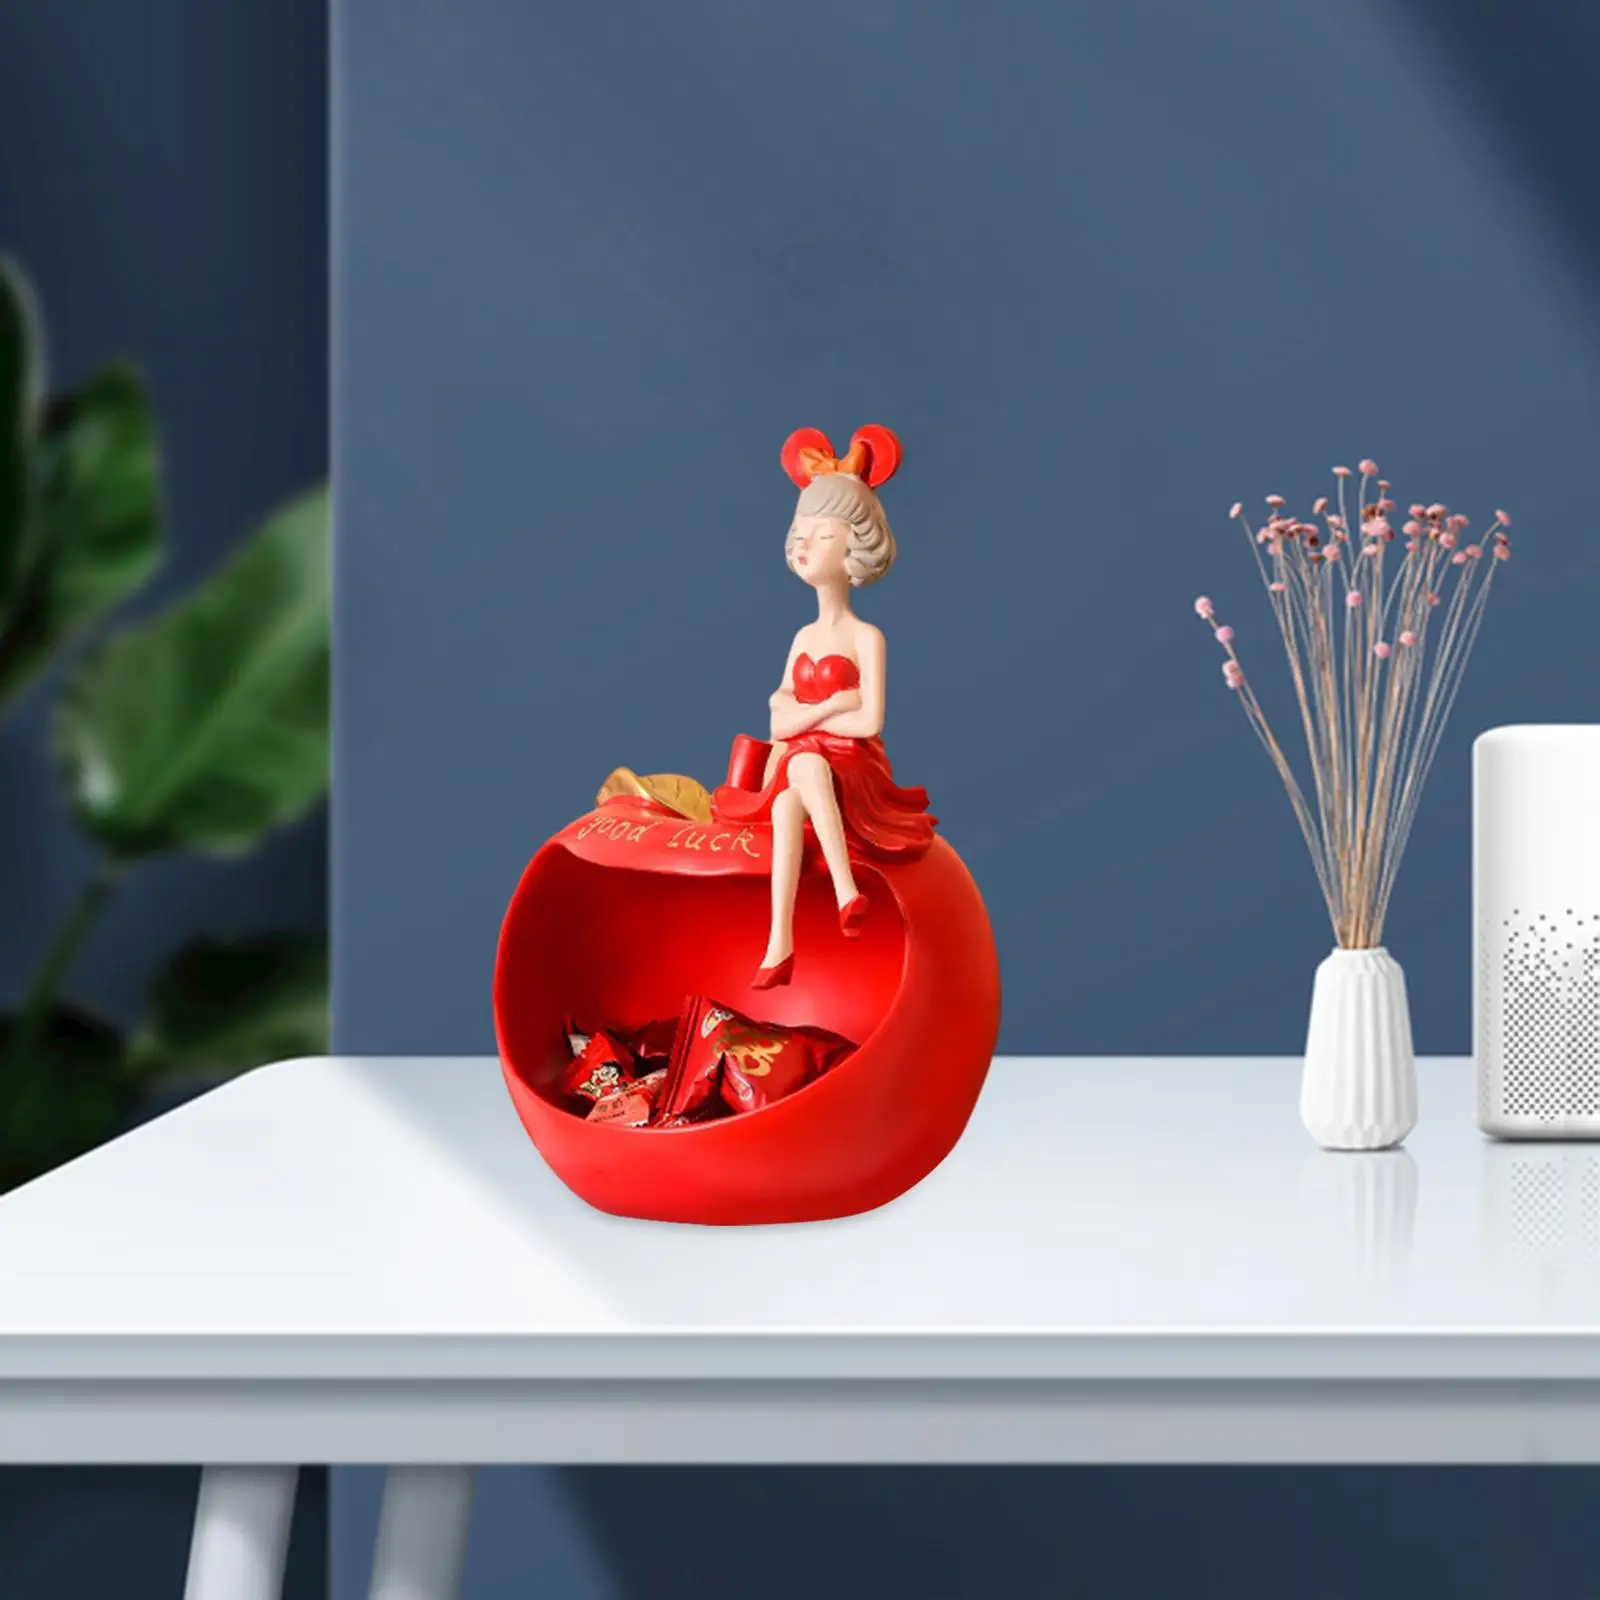 Resin Apple Girl Storage Statue Art Crafts Decor Keys Snacks Tray Sculpture for Hotel Living Room Home Phone Stand Gifts